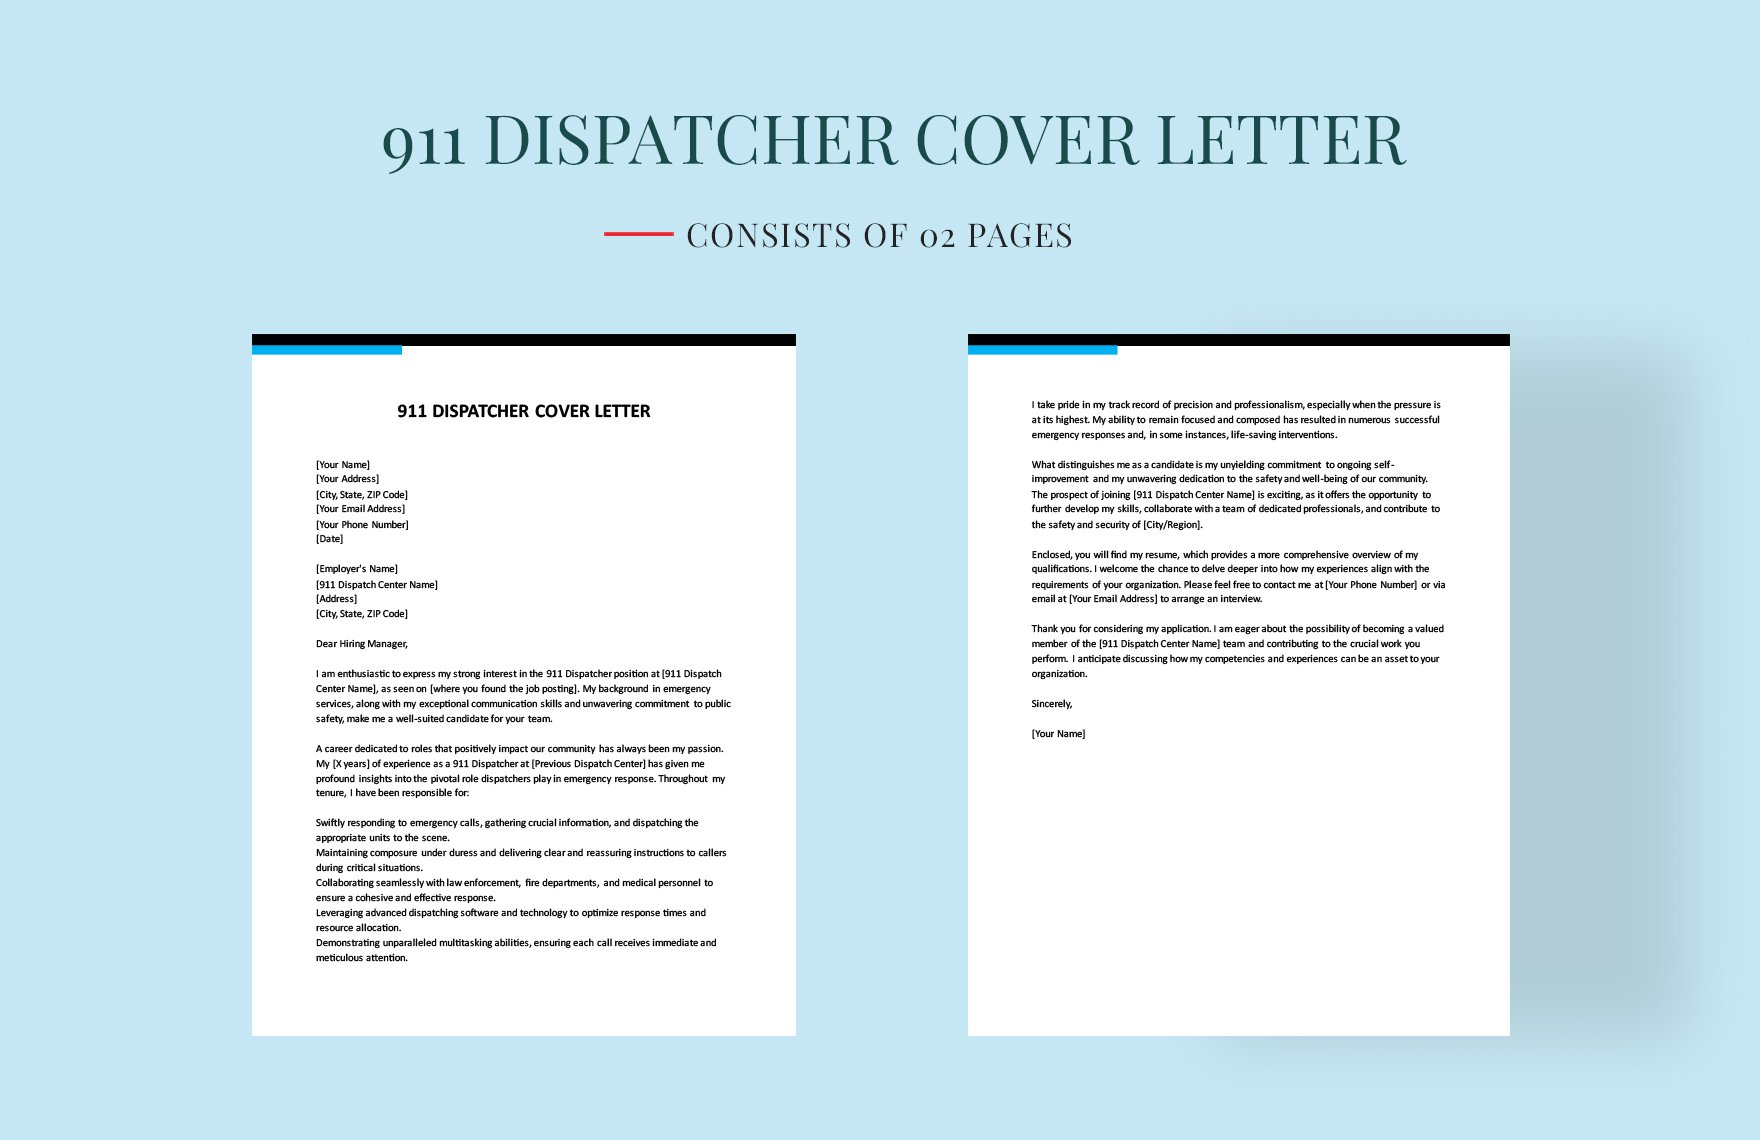 911 dispatcher cover letter no experience